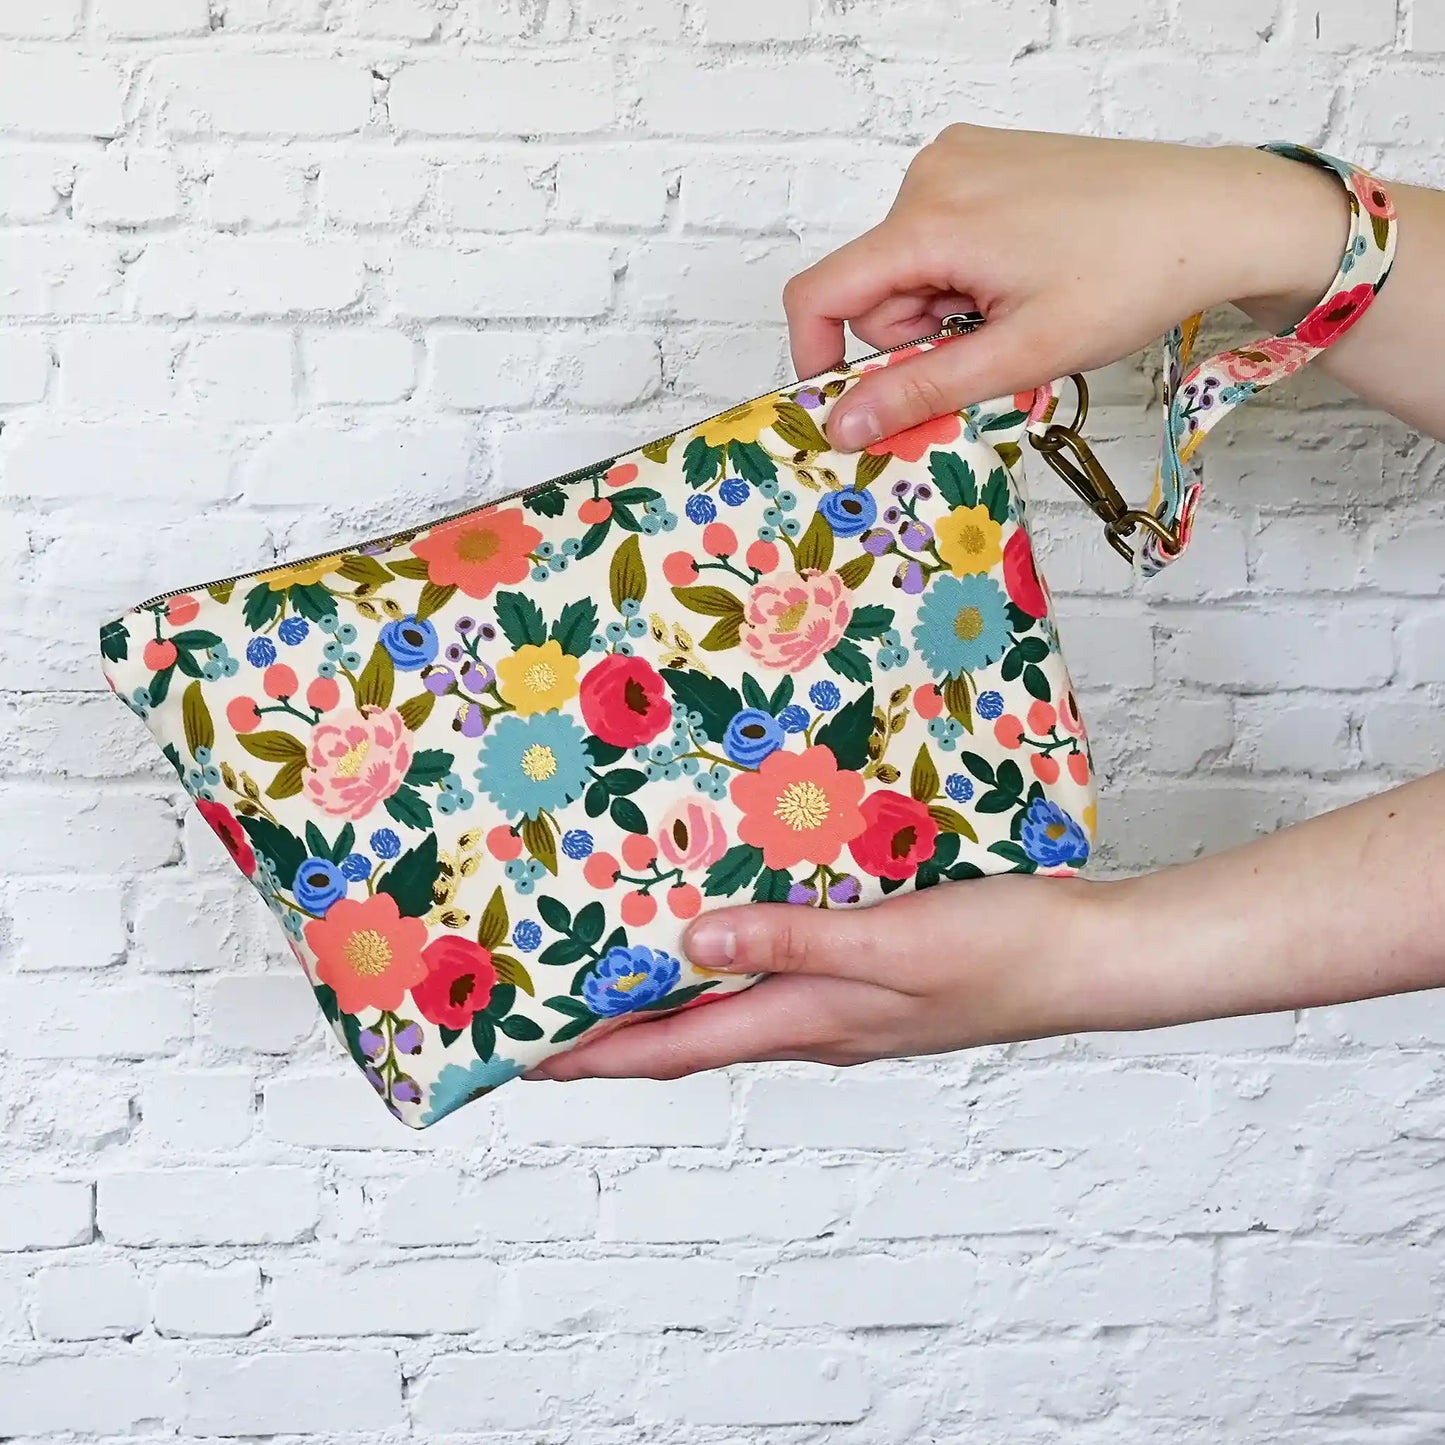 Pretty cream floral zippered pouch with wrist strap in fabrics from Rifle Paper Co's Antique Garden collection.  Handmade by Yellow Petal Handmade in Canada.